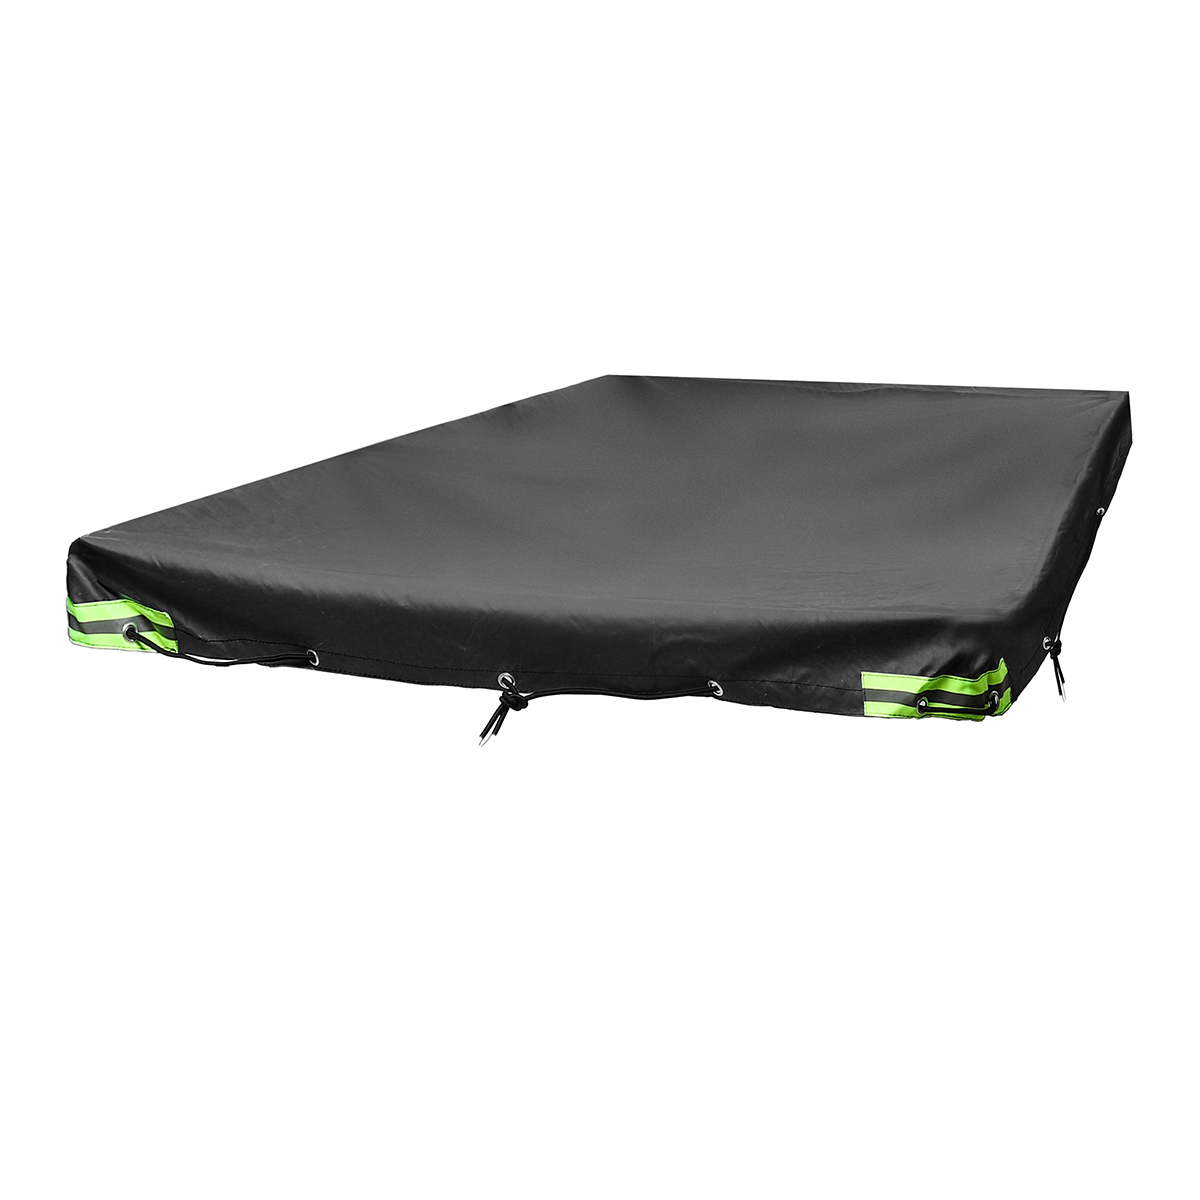 214x122cm-Foldable-Trailer-Car-Cover-Waterproof-Windproof-Dust-Protector-With-Rubber-Belt-1563449-2